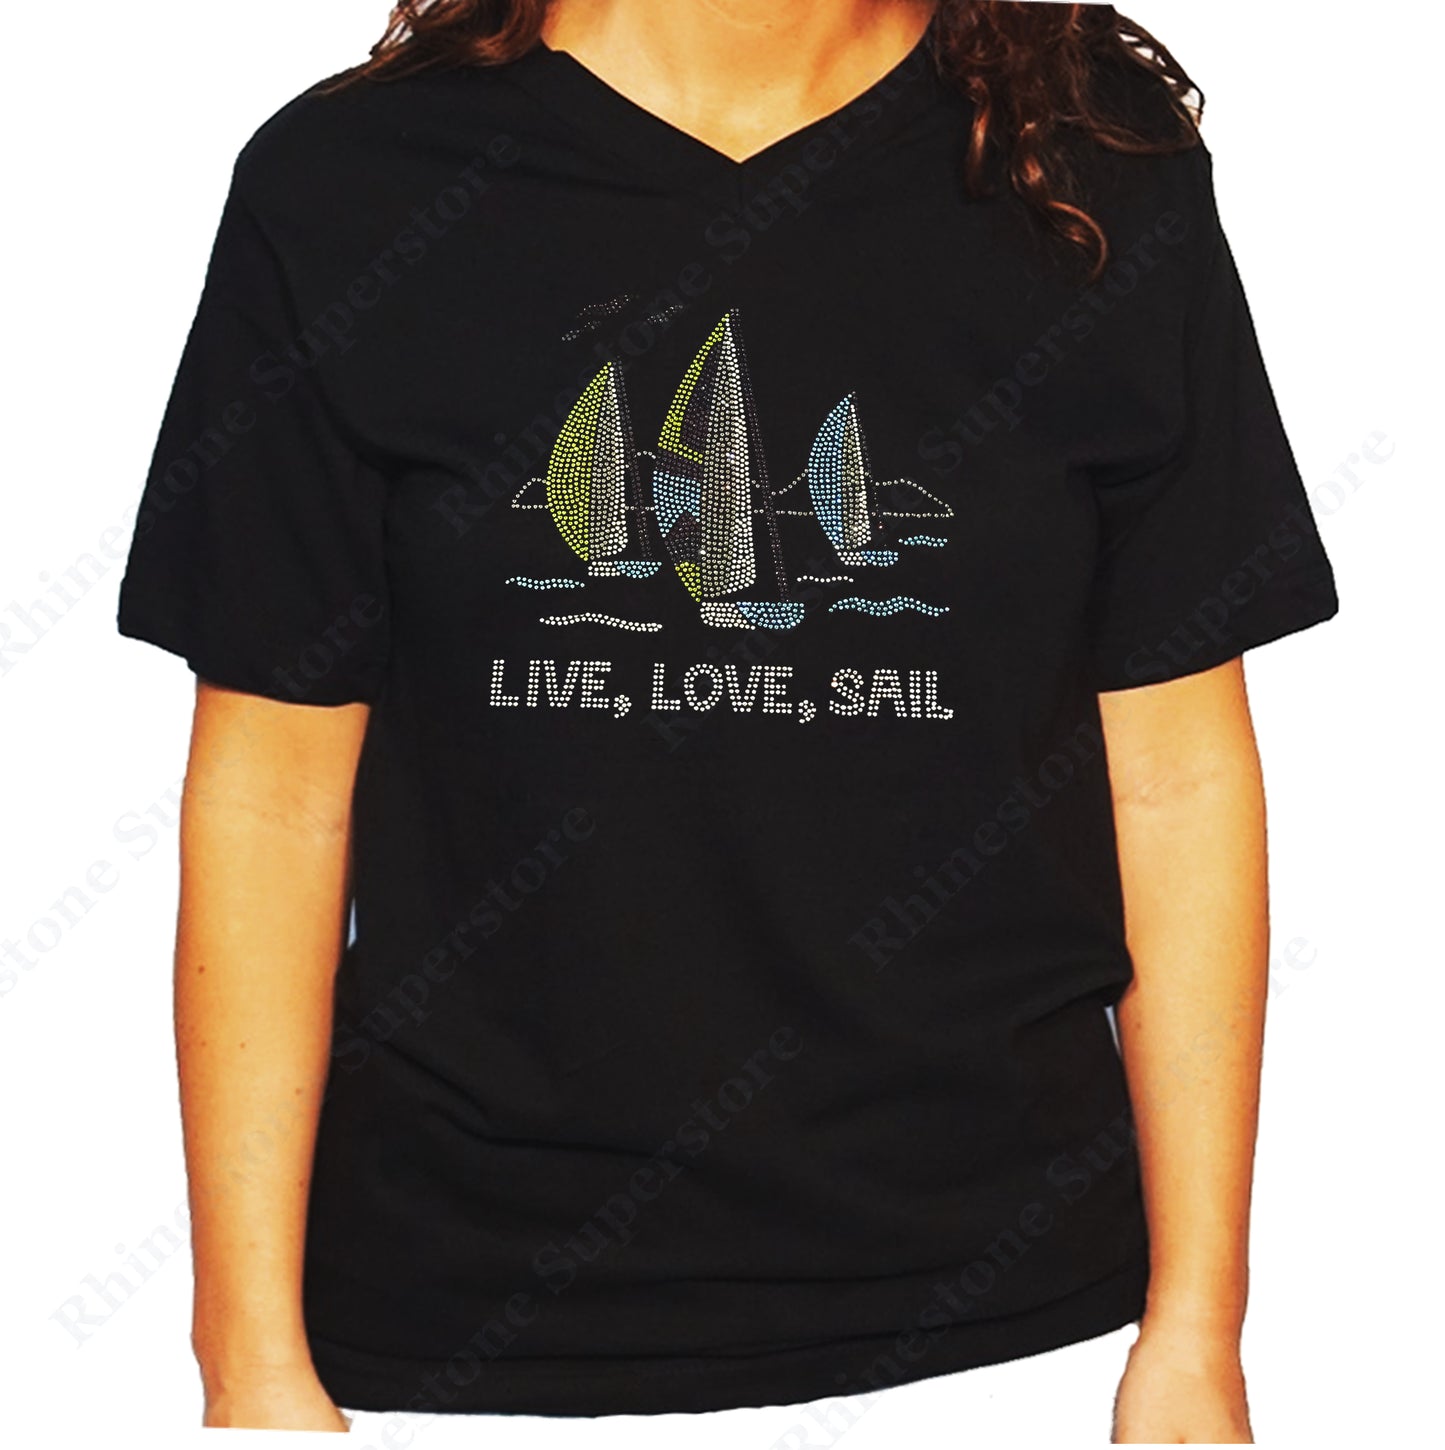 Women's / Unisex T-Shirt with Live Love Sail in Rhinestones Sailboat